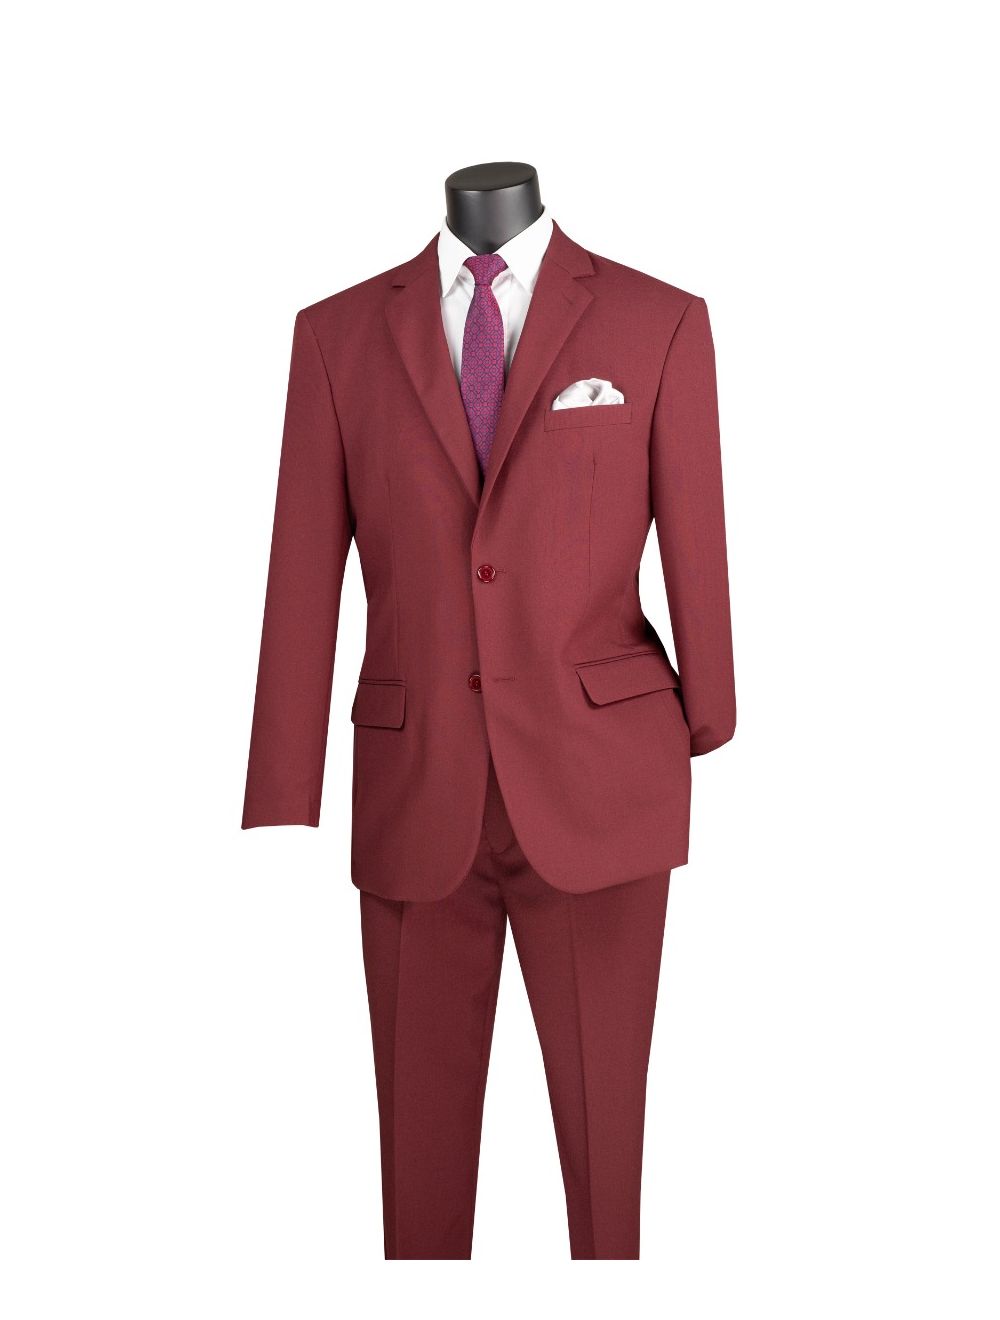 2019 Style Mens Wedding Maroon Tuxedo In Red, Burgundy, And Royal Blue  Perfect For Business Dinner Orarty Suit Jacket, Pants, Tie Included From  Coolman168, $72.37 | DHgate.Com